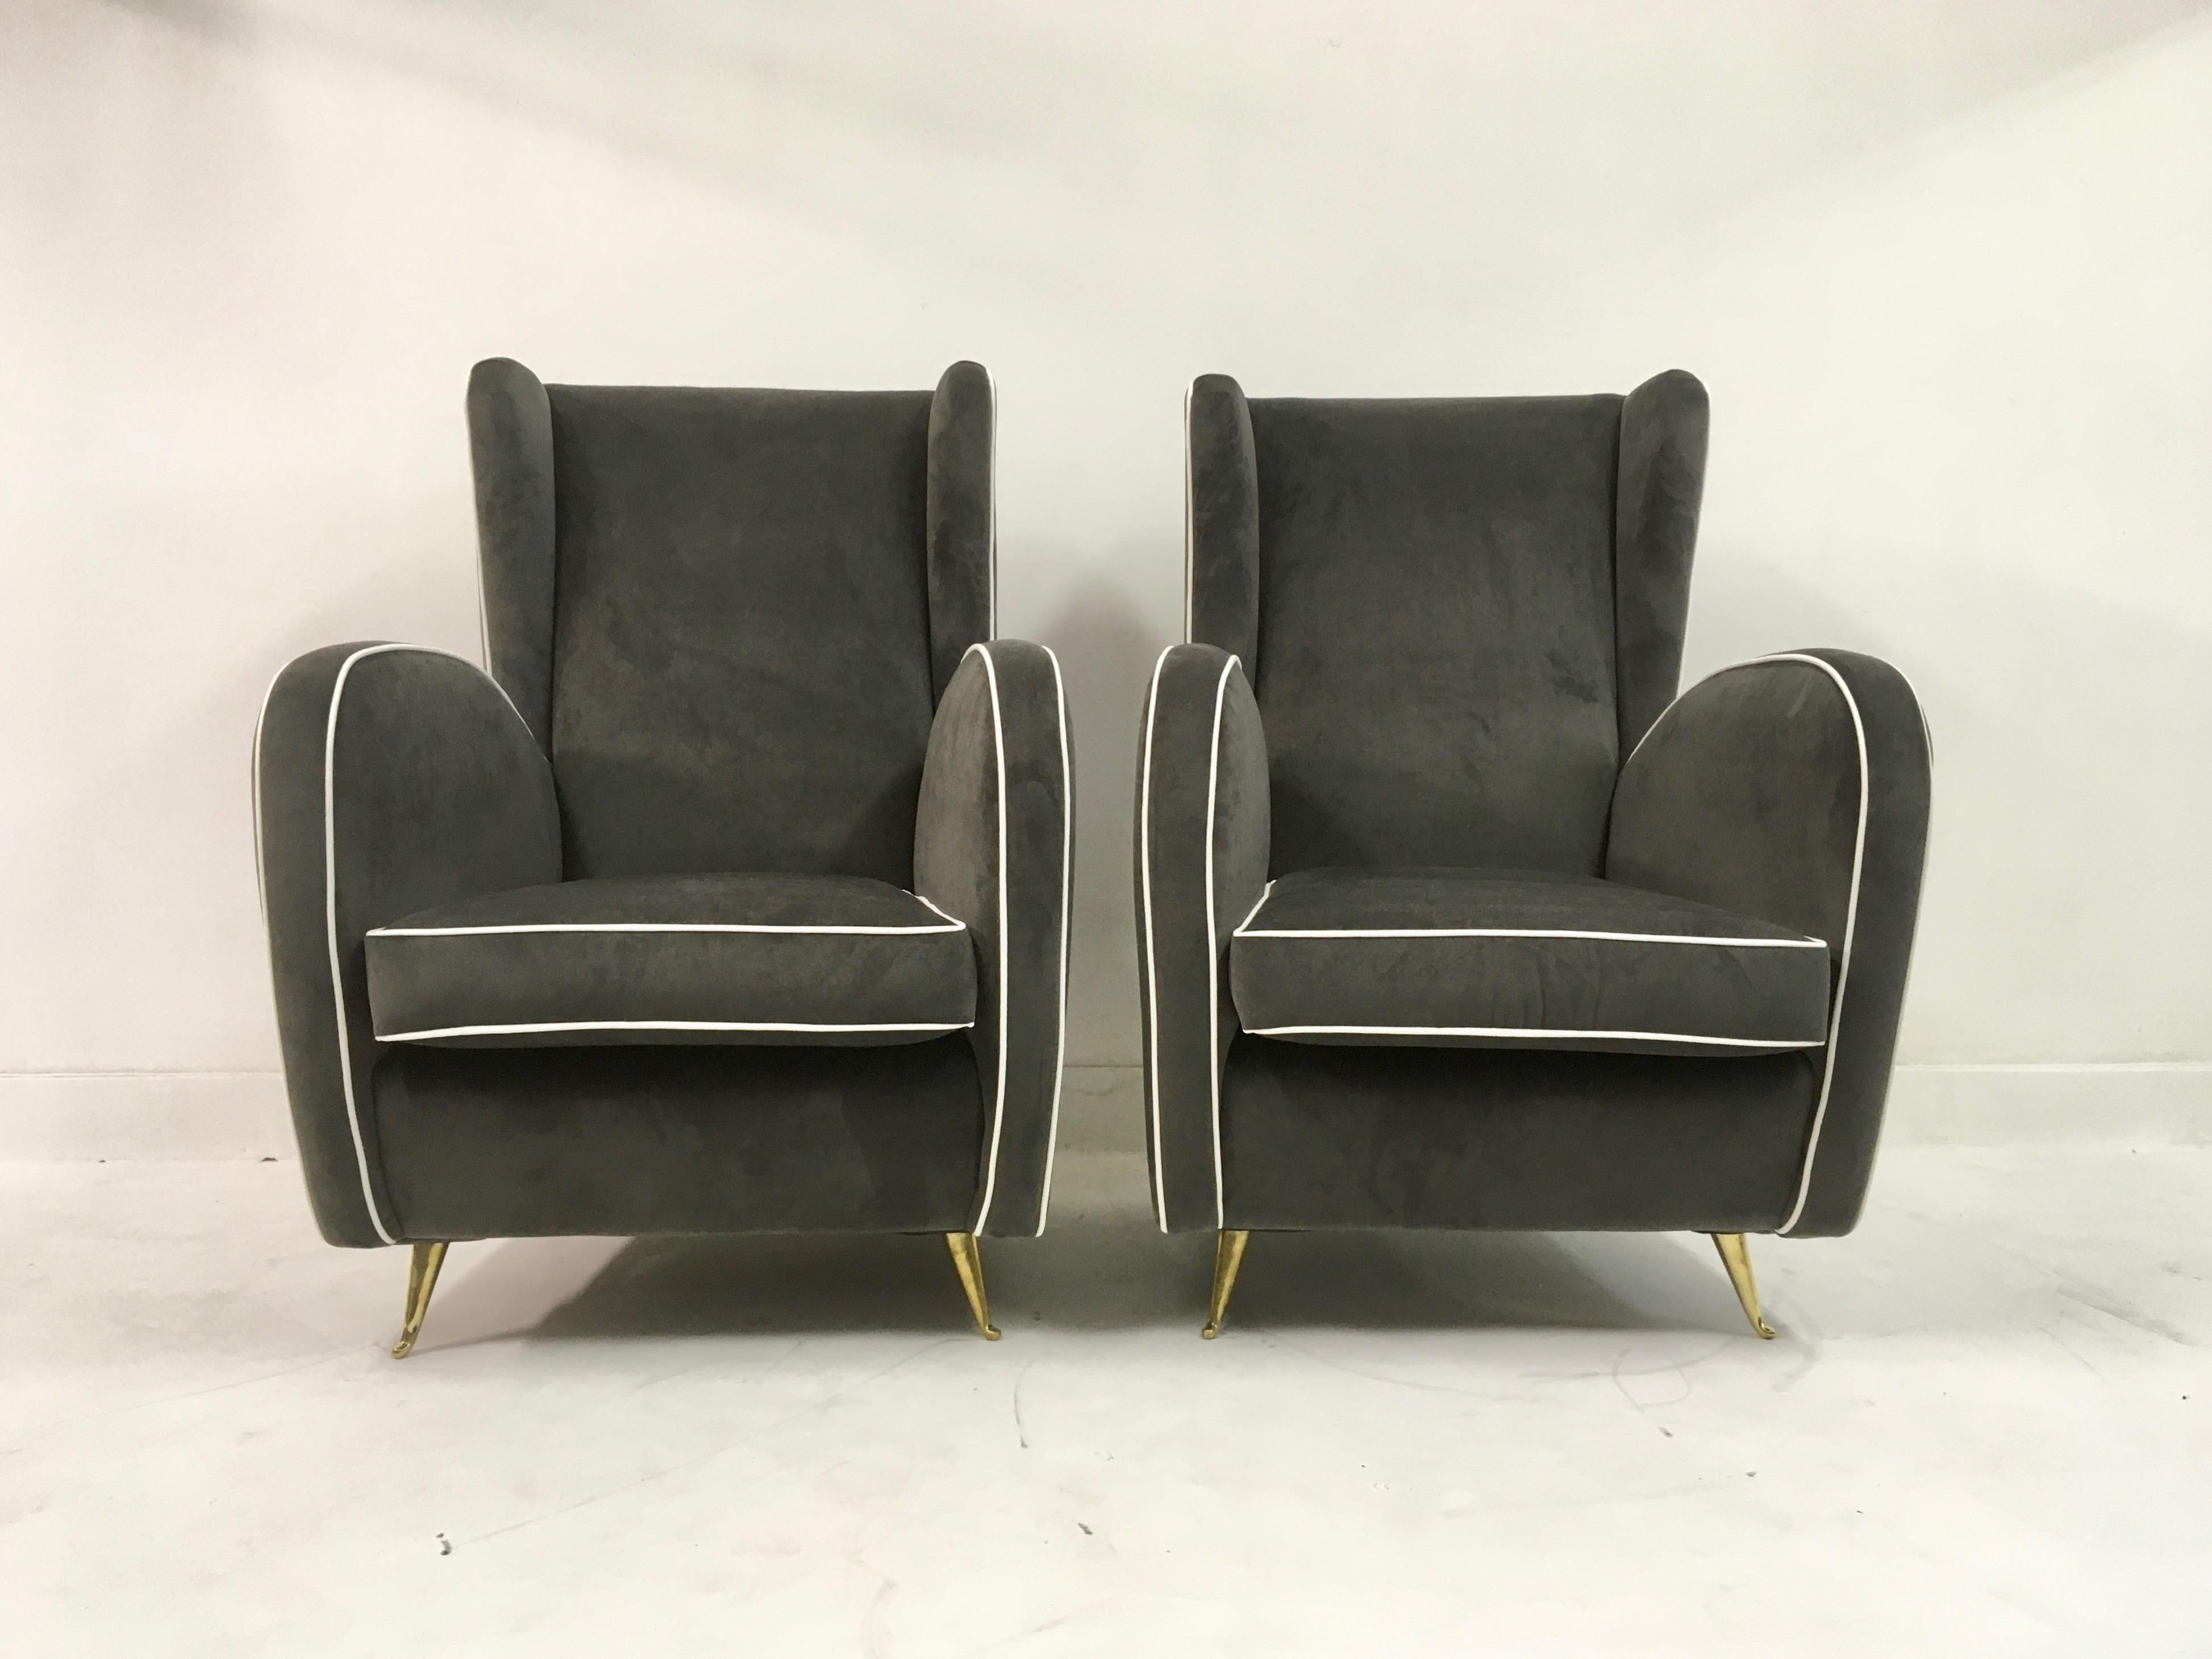 A pair of armchairs

On brass legs

Grey velvet

White piping

High back

Italy, 1950s.